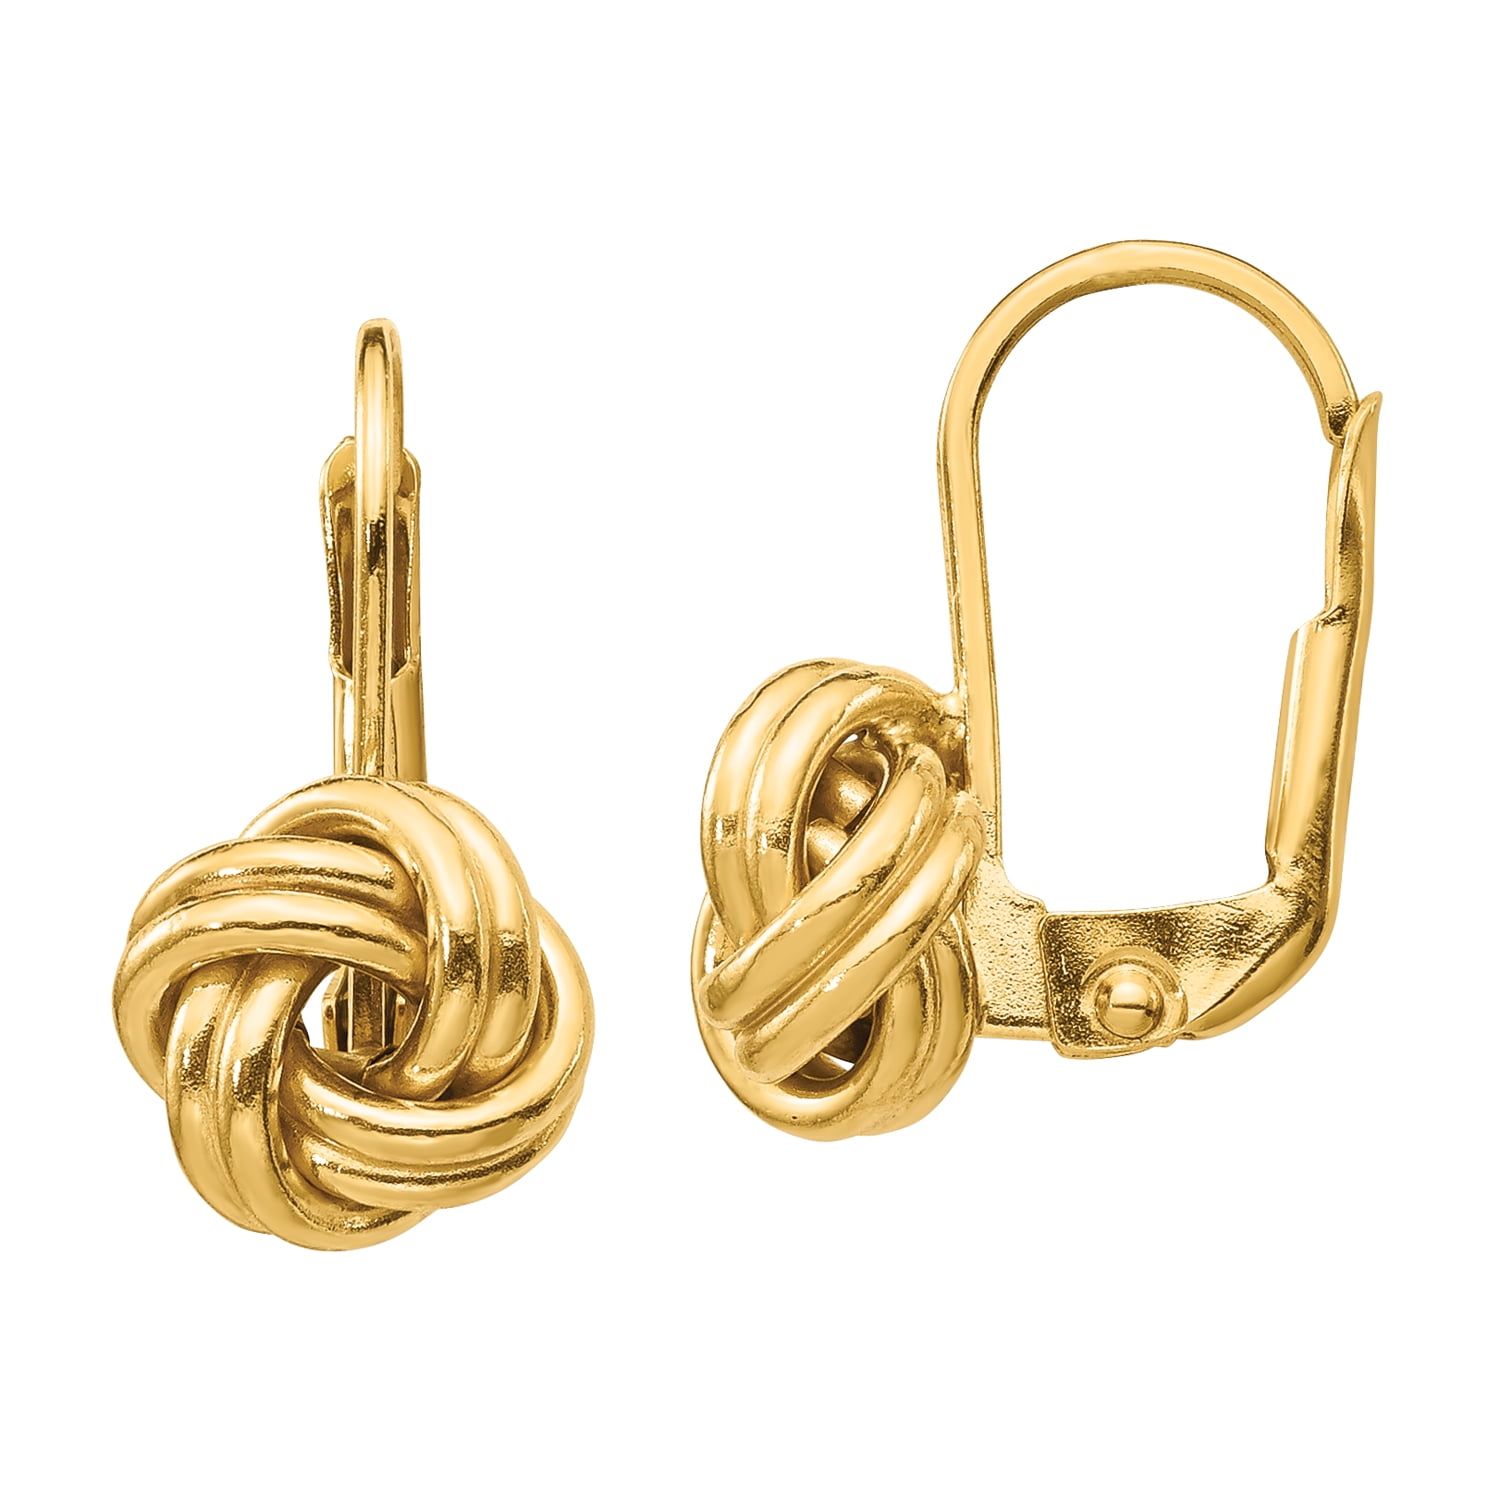 Solid 14k Yellow Gold Polished Love Knot Leverback Earrings 8mm x 13mm 